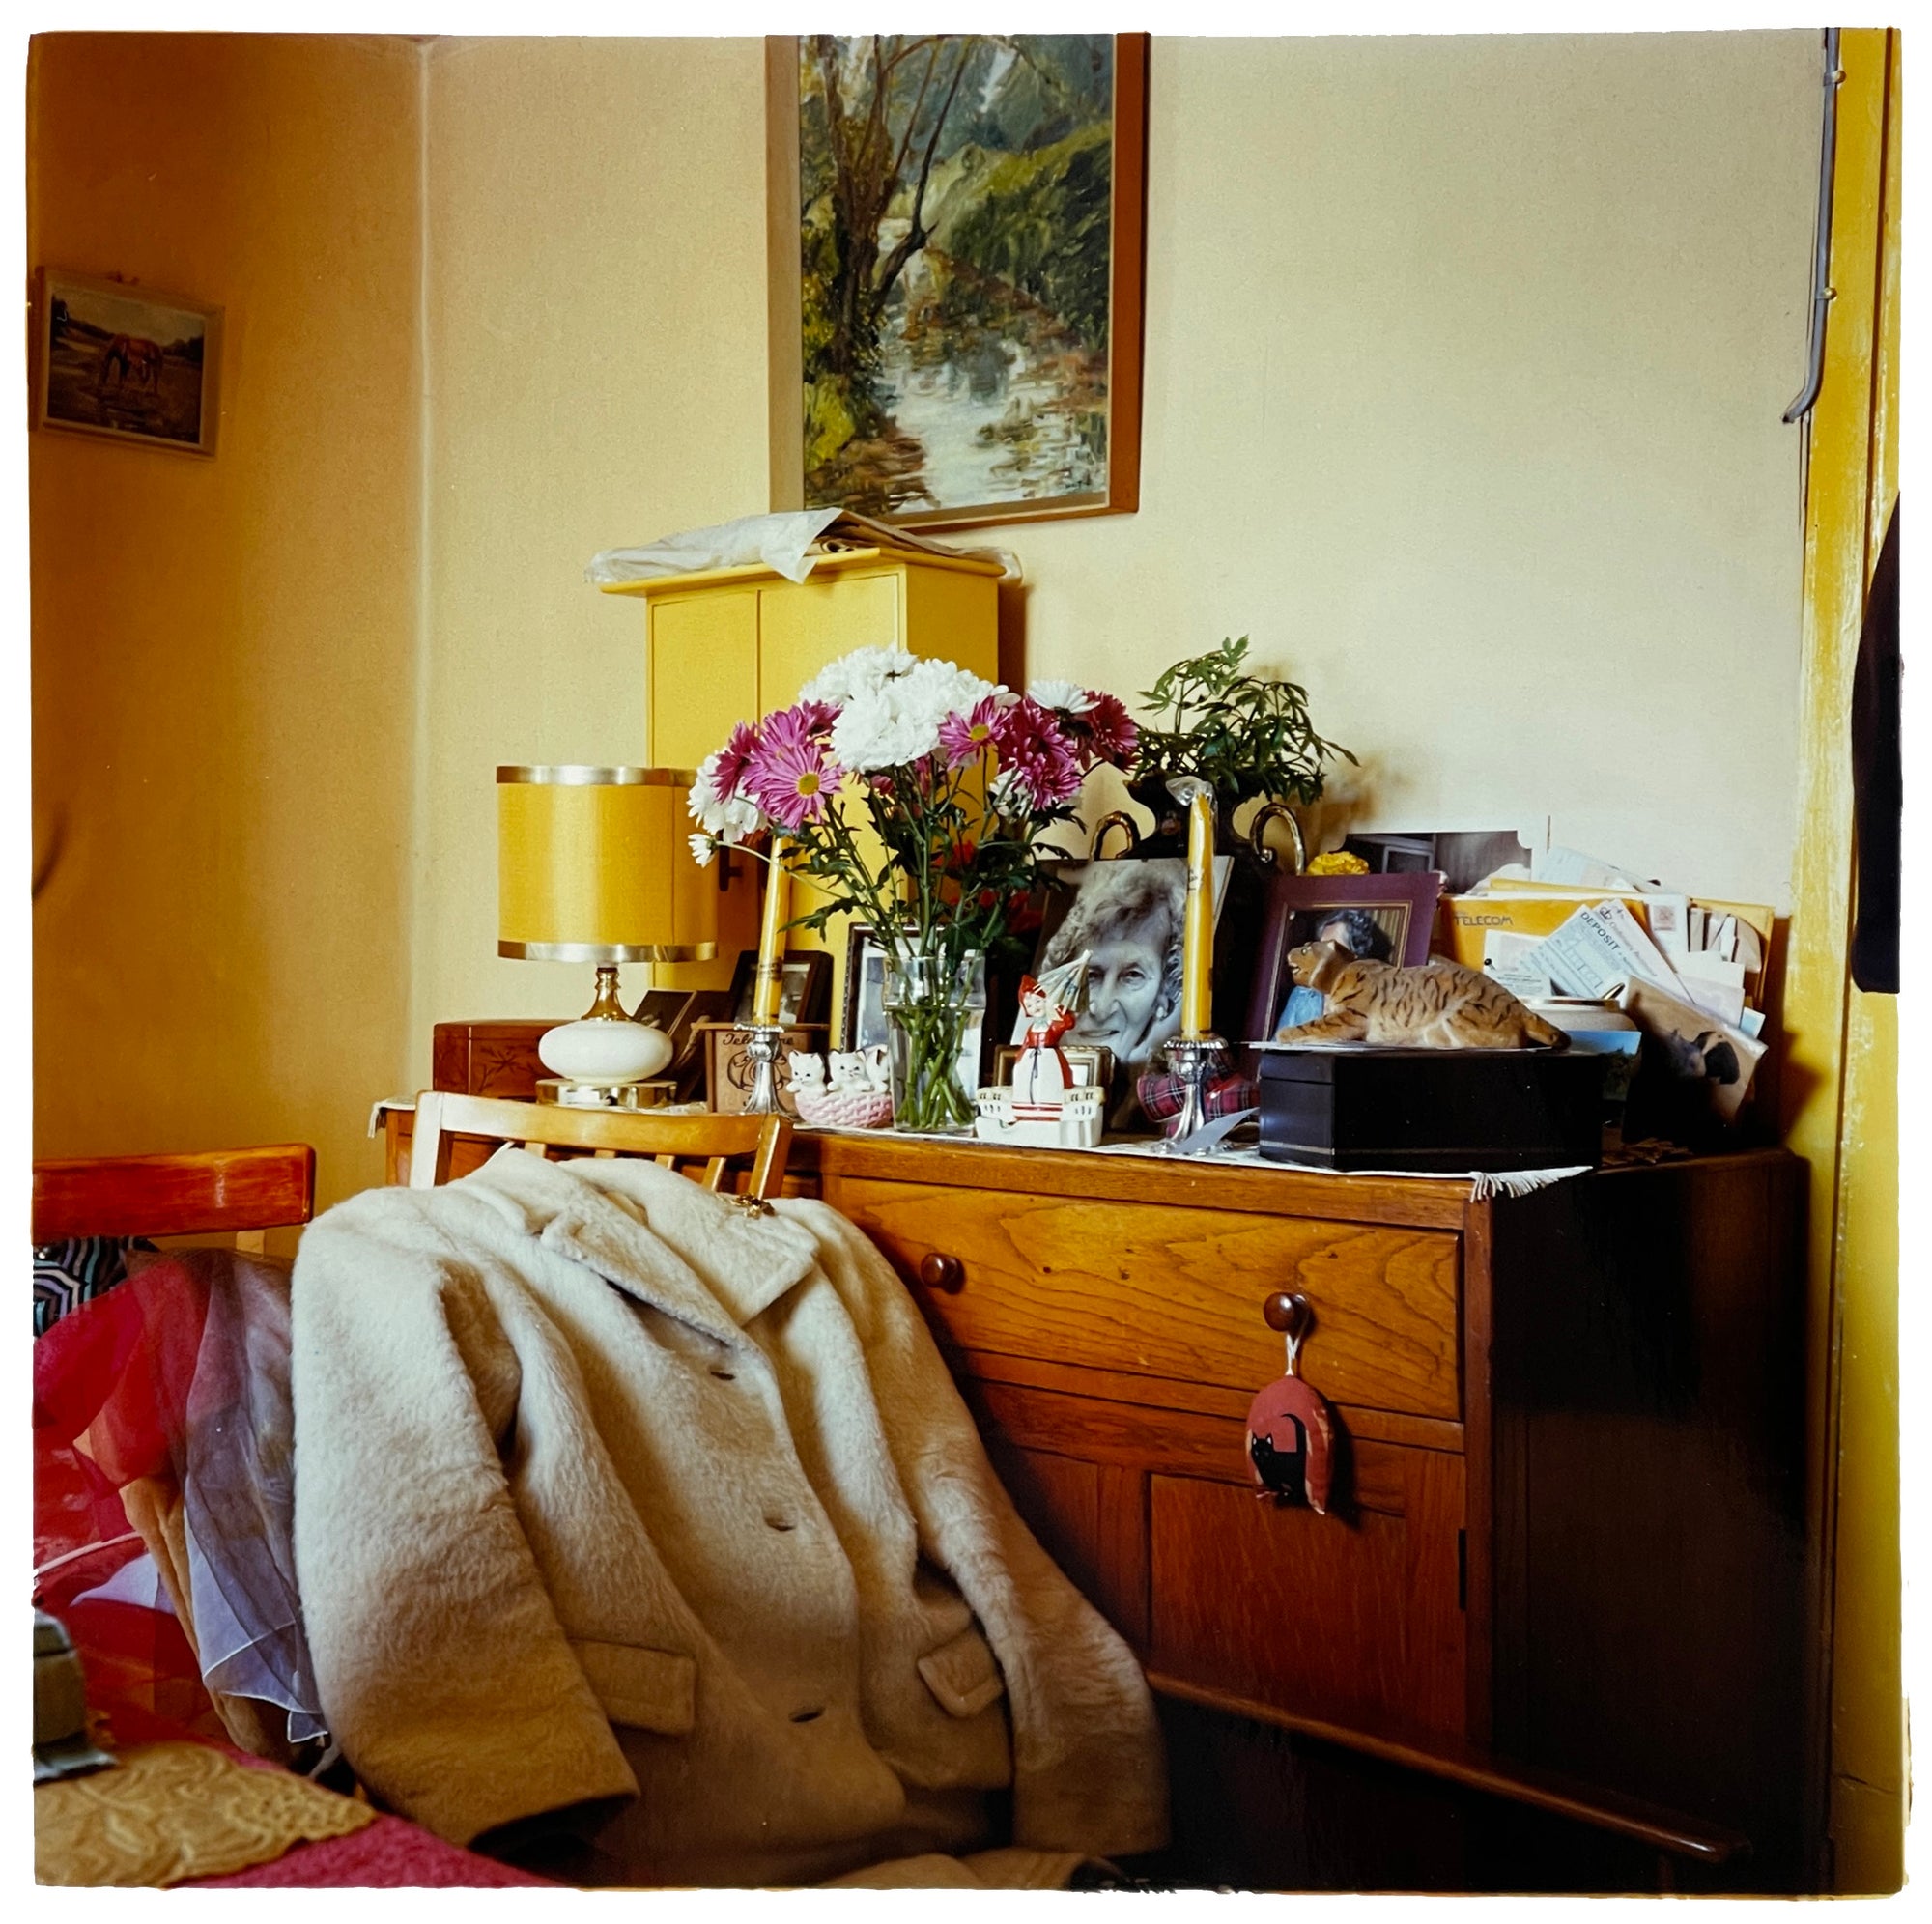 Photograph by Richard Heeps. A wooden dresser with photos, bunches of flowers, candles, ornaments, lamps and a full inbox on top.  In front of this busy piece of furniture are clothes laid on a chair, on top a white fur jacket. 